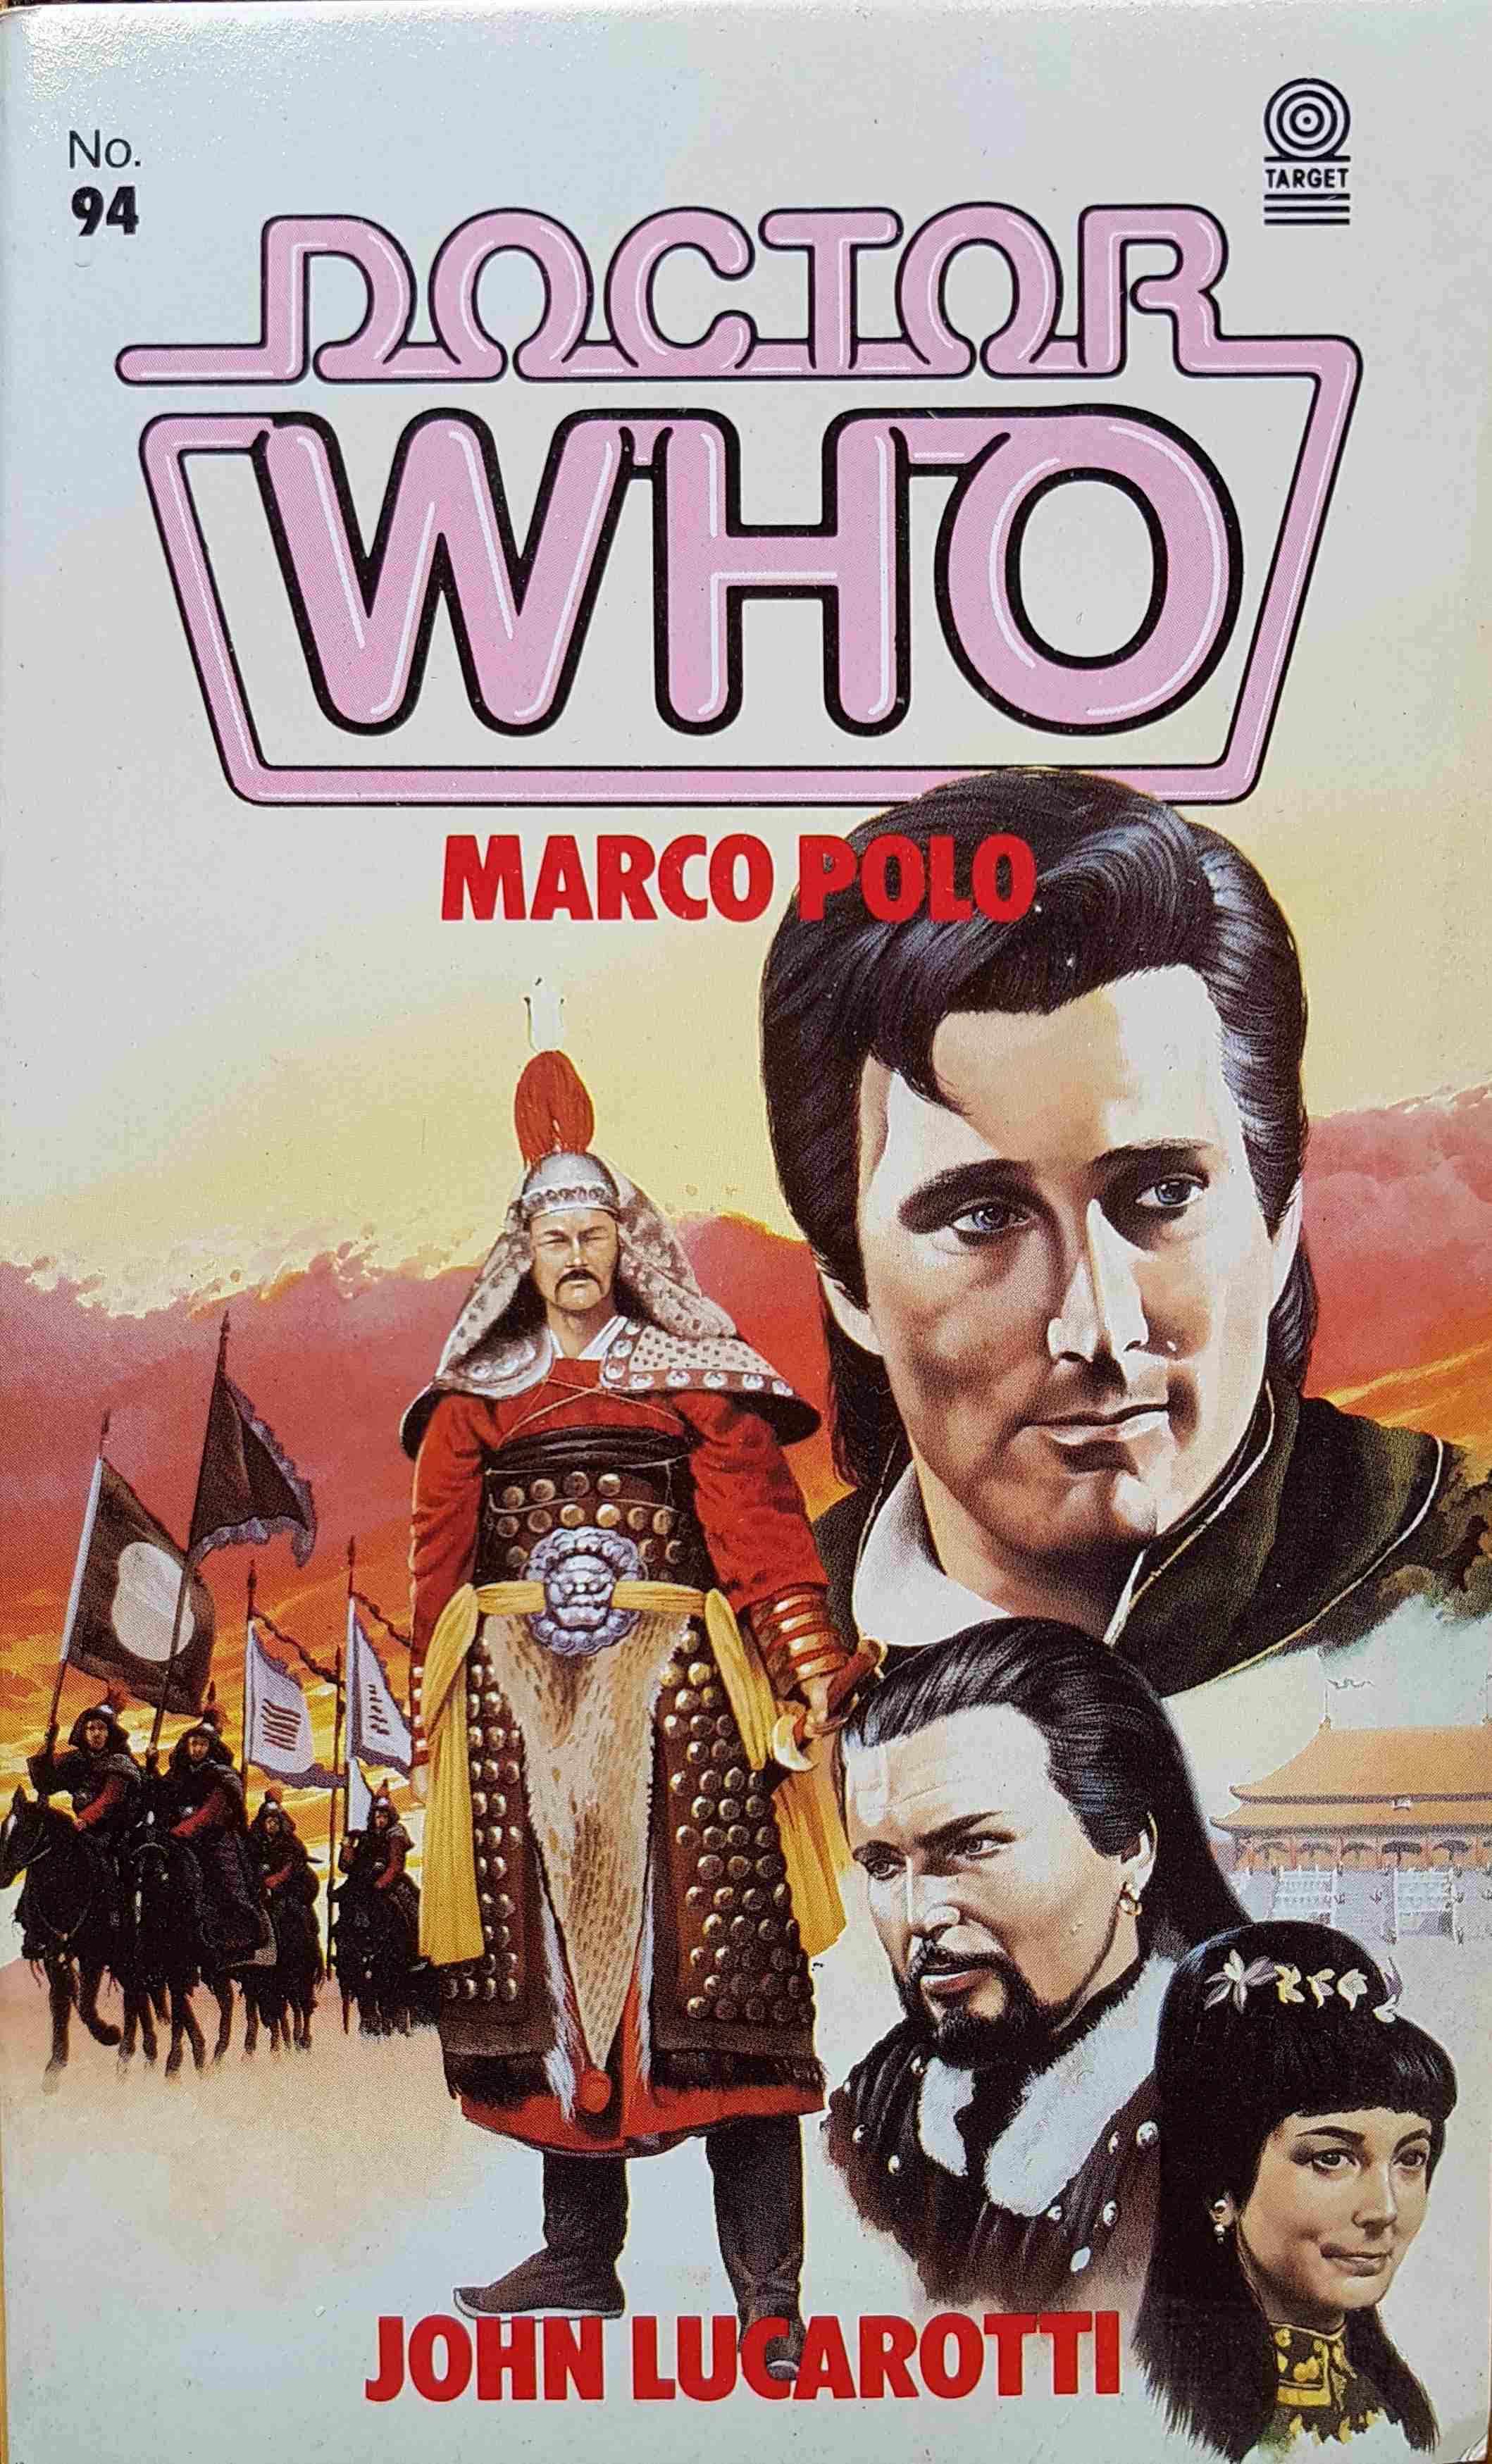 Picture of 0-426-19967-7 Doctor Who - Marco Polo by artist John Lucarotti